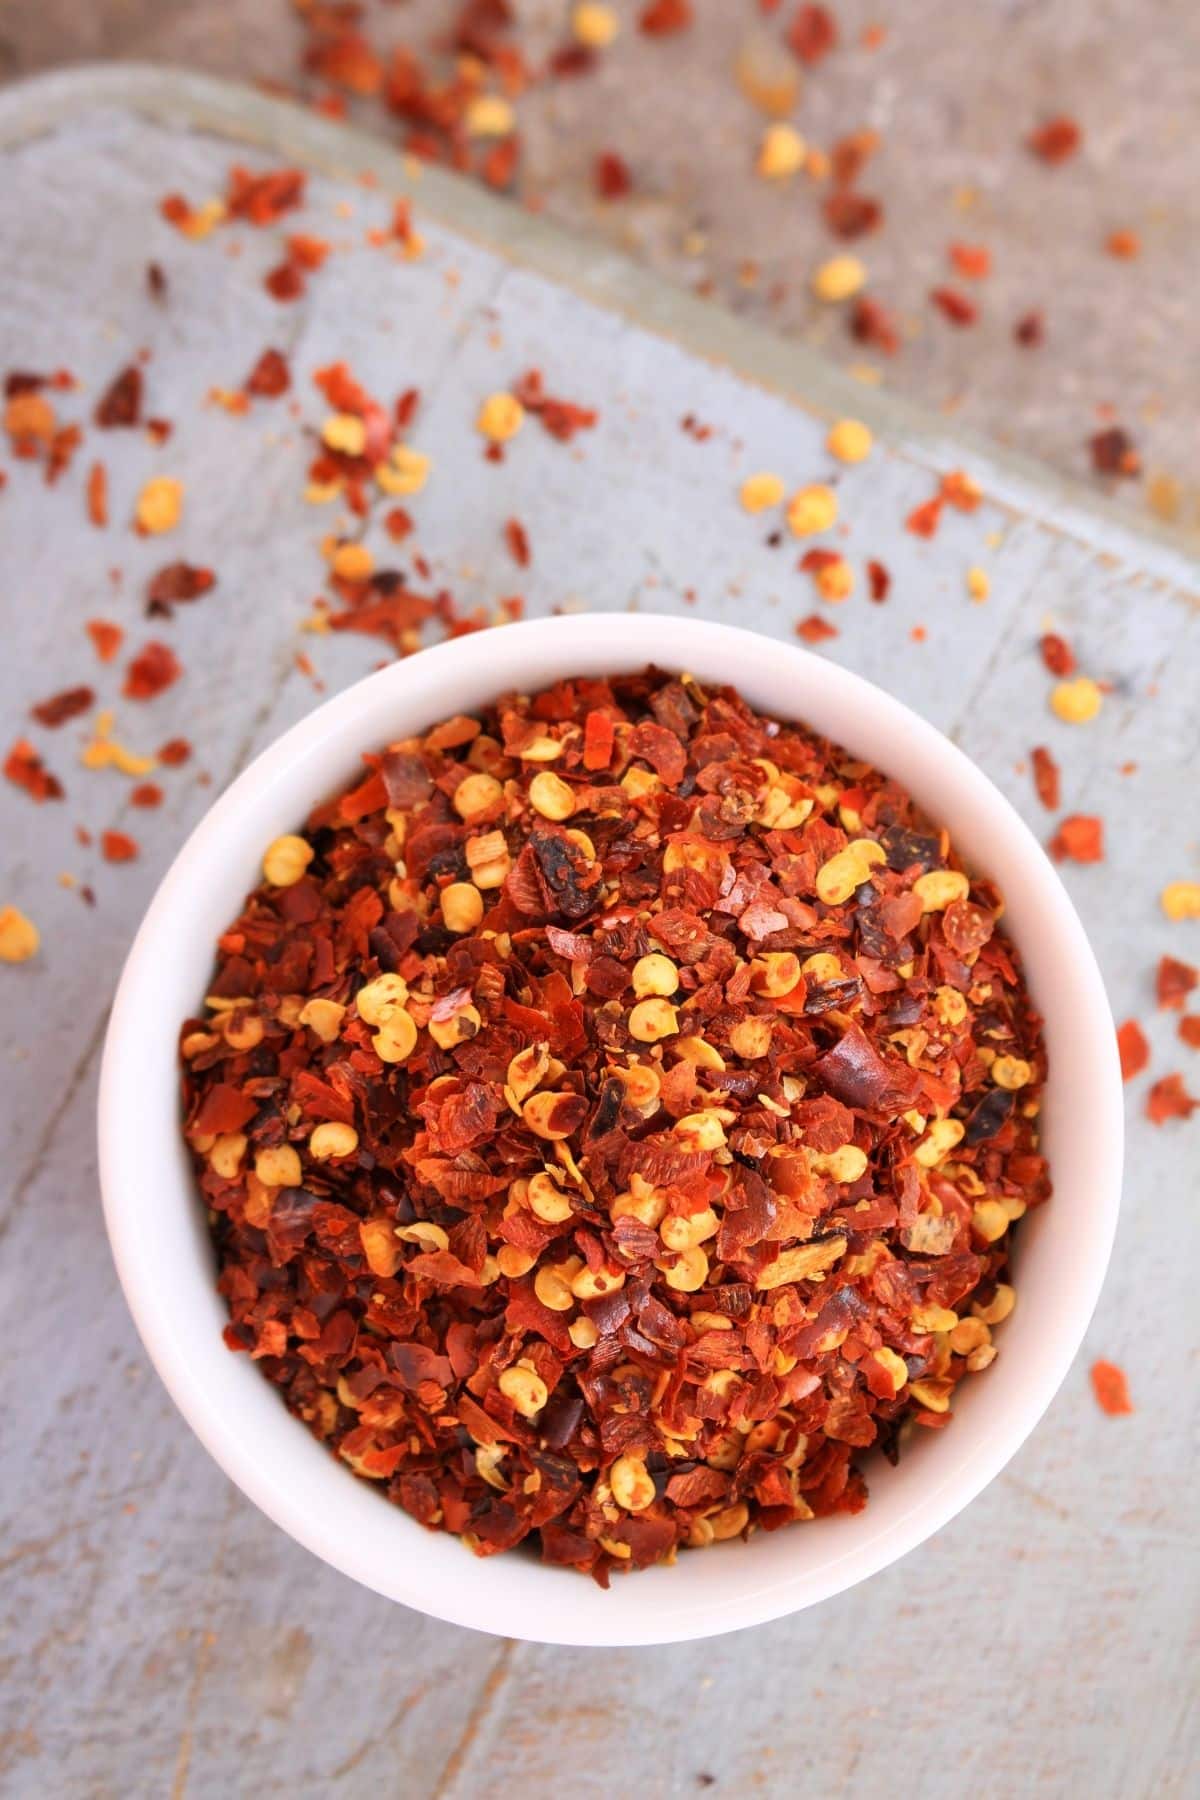 Bowl of red pepper flakes on wooden surface.